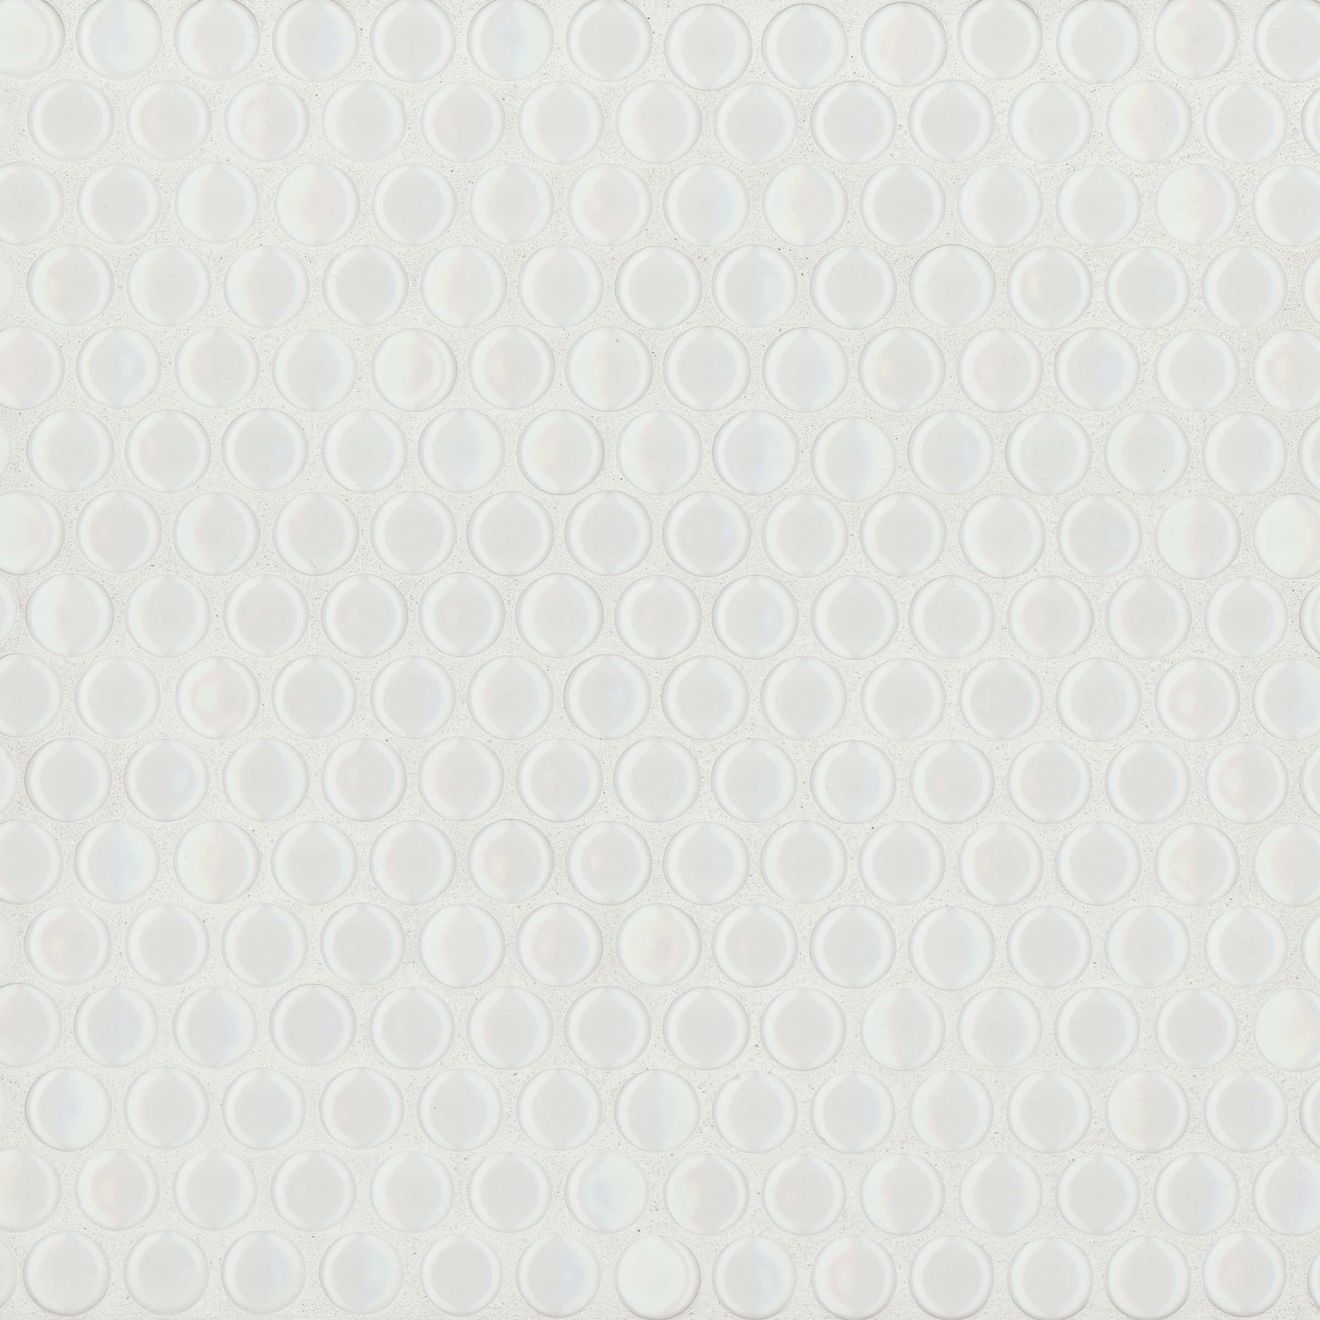 White penny shaped mosaic tile on a beige background.